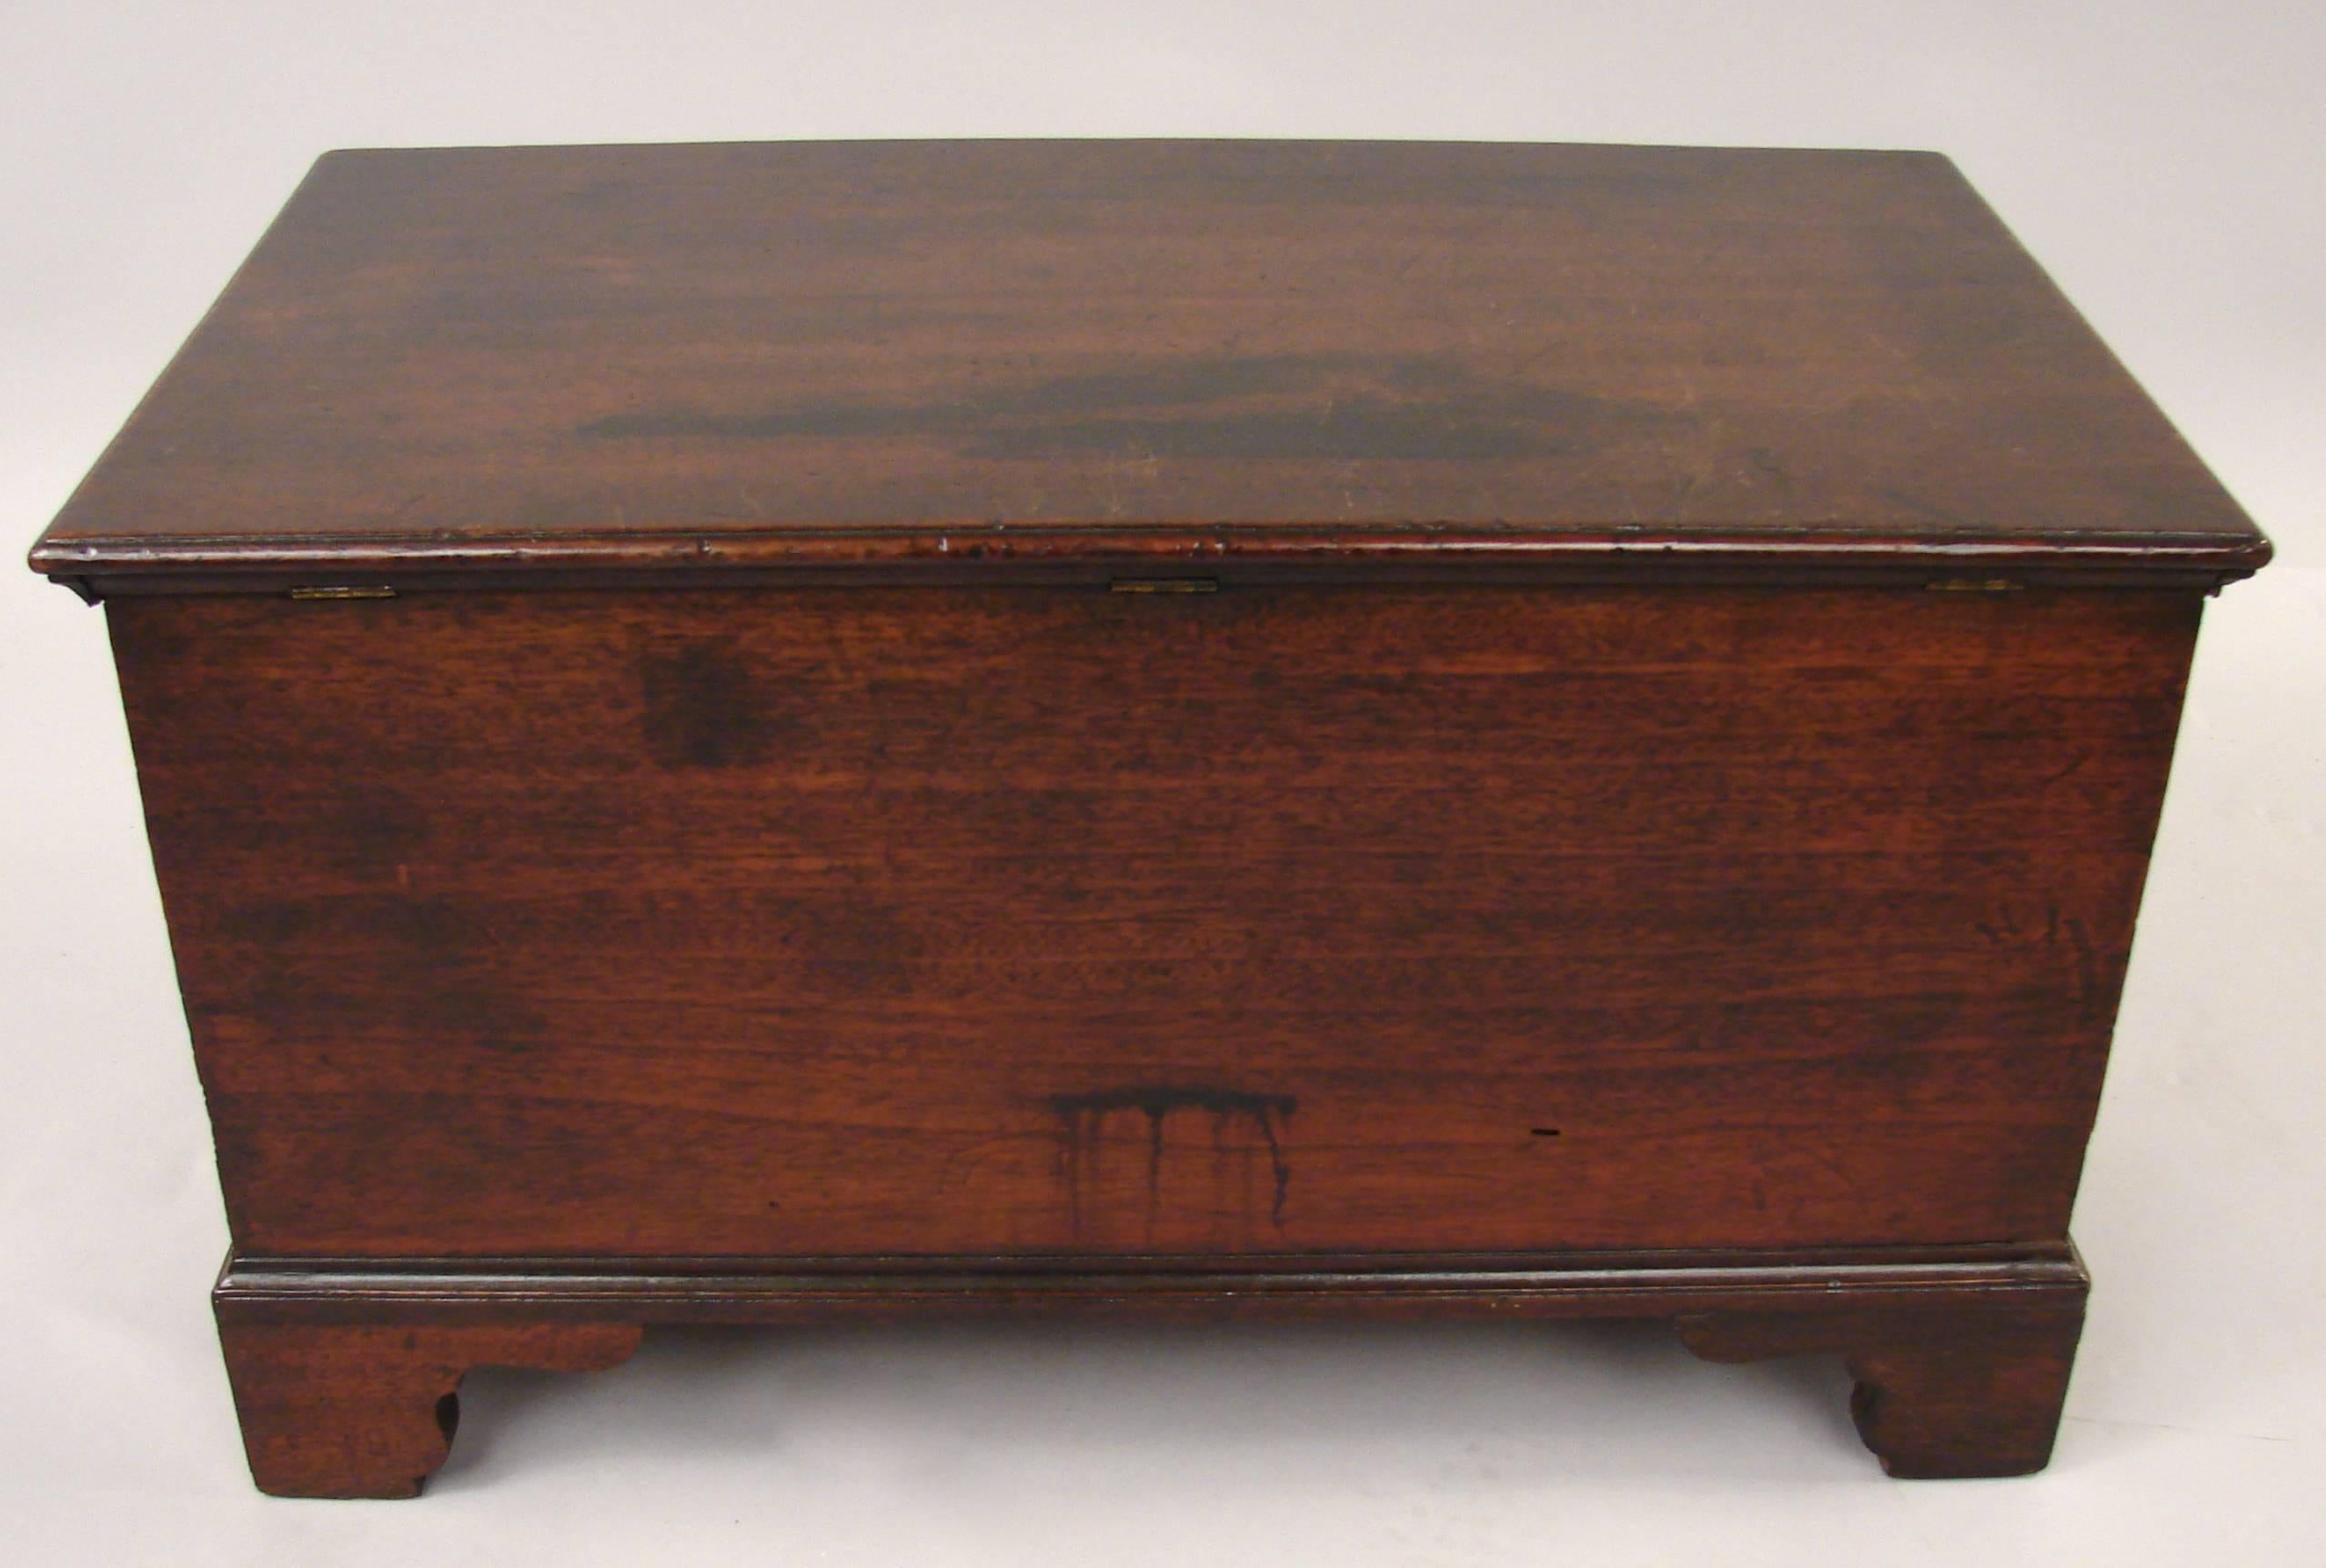 An unusual George III mahogany small chest on bracket feet, the hinged lid opening to an elaborately fitted interior with multiple drawers and sliding sections. Excellent color.